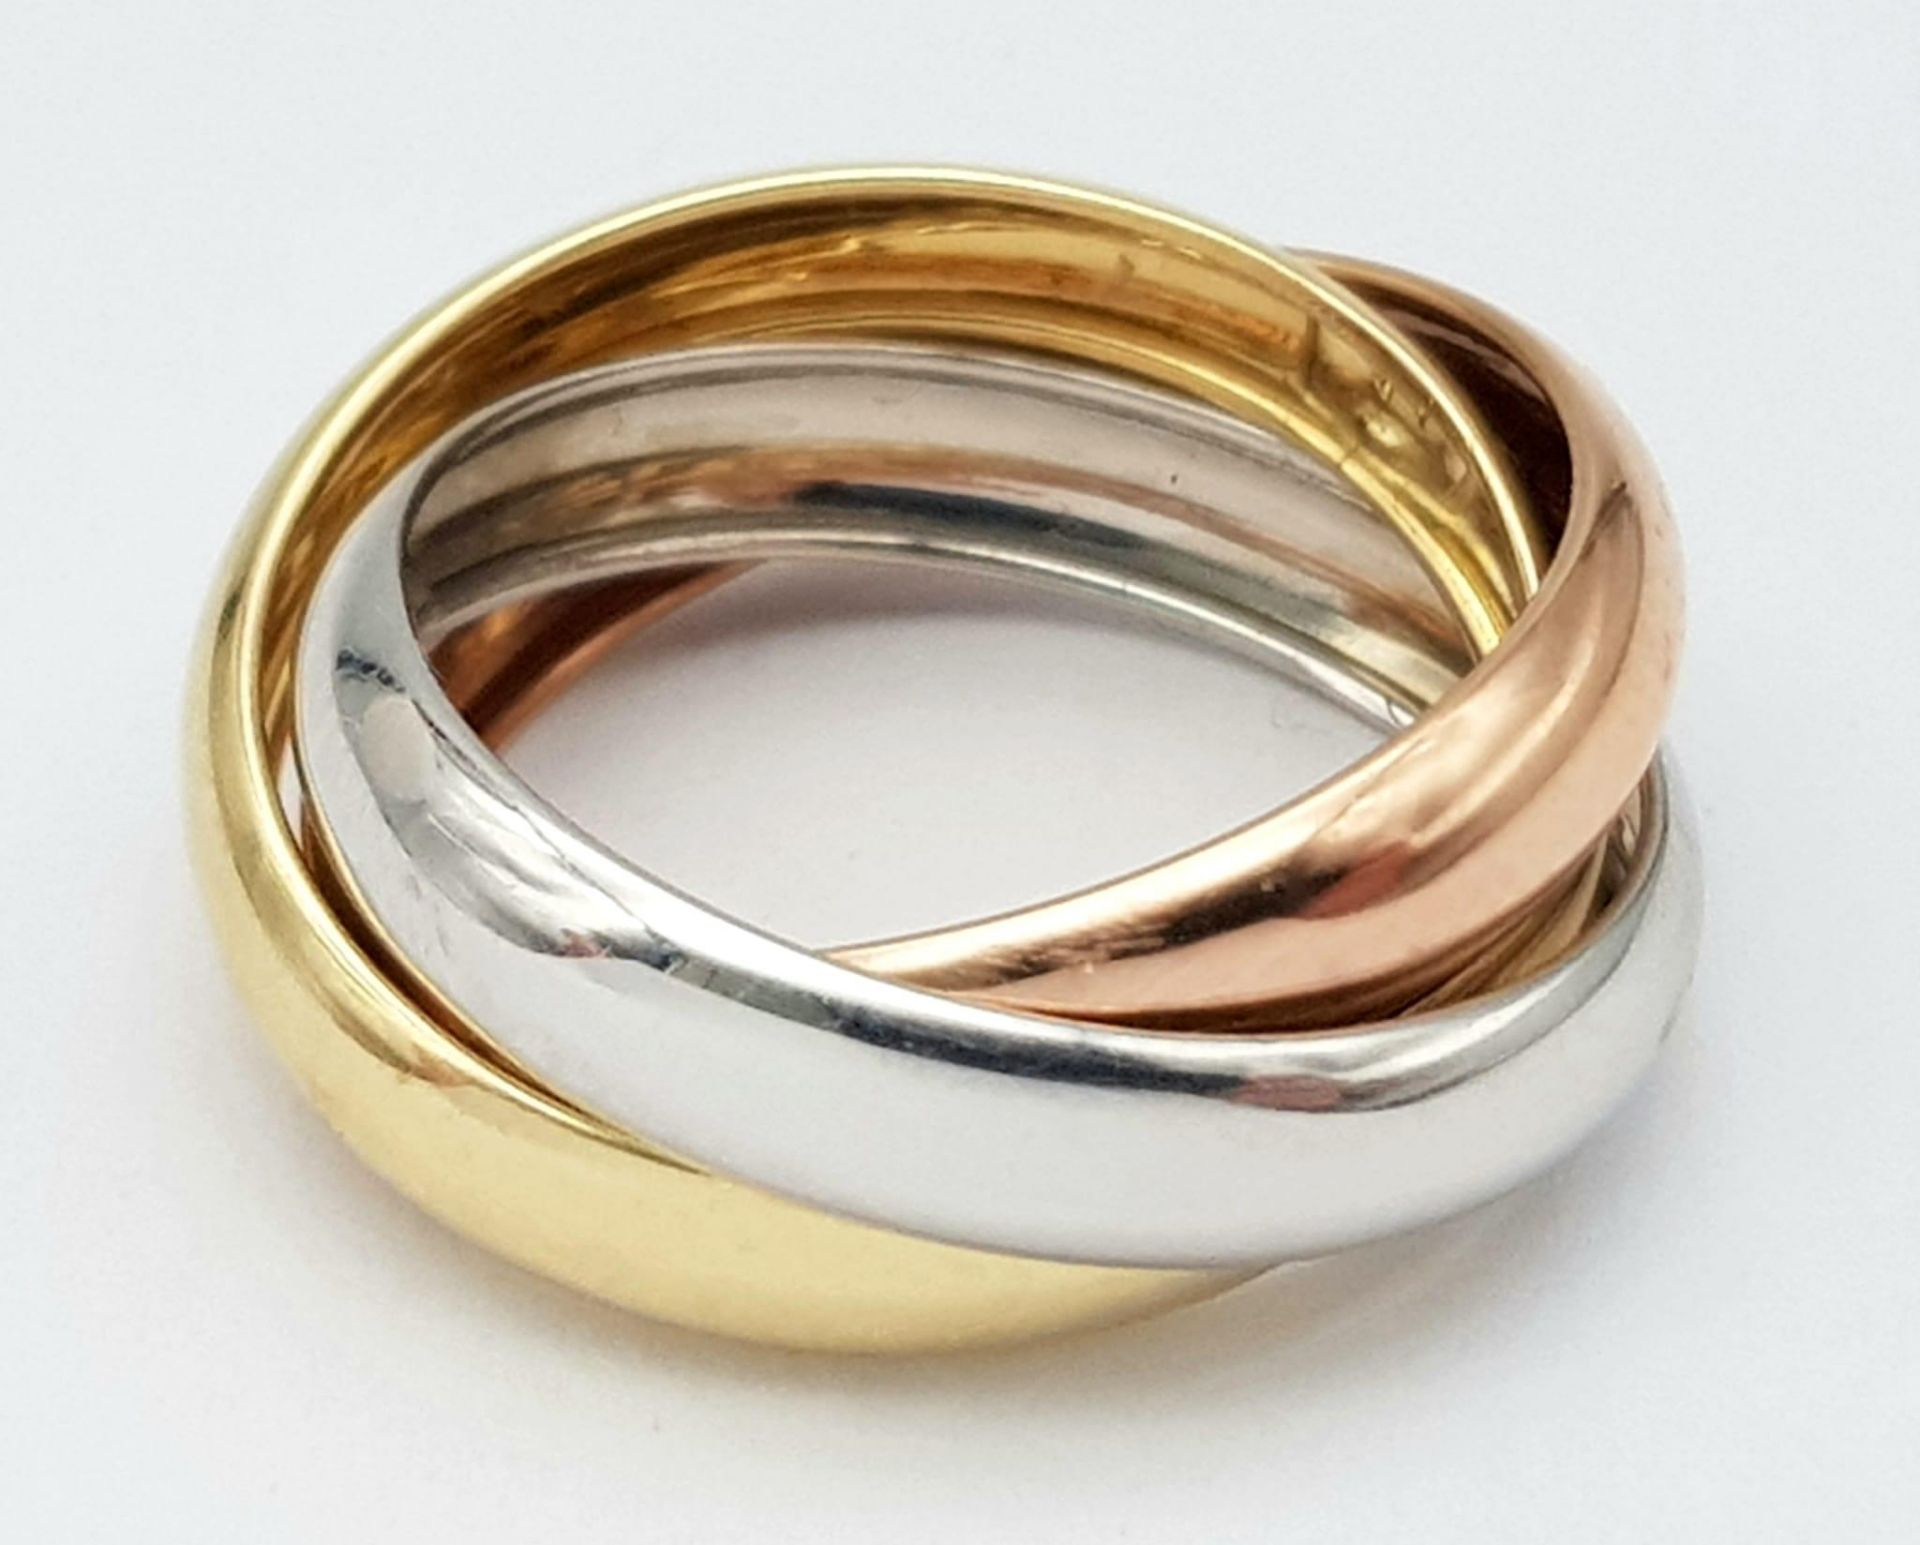 9K 3 colour gold Russian Wedding Band, 2.6g total weight, size J